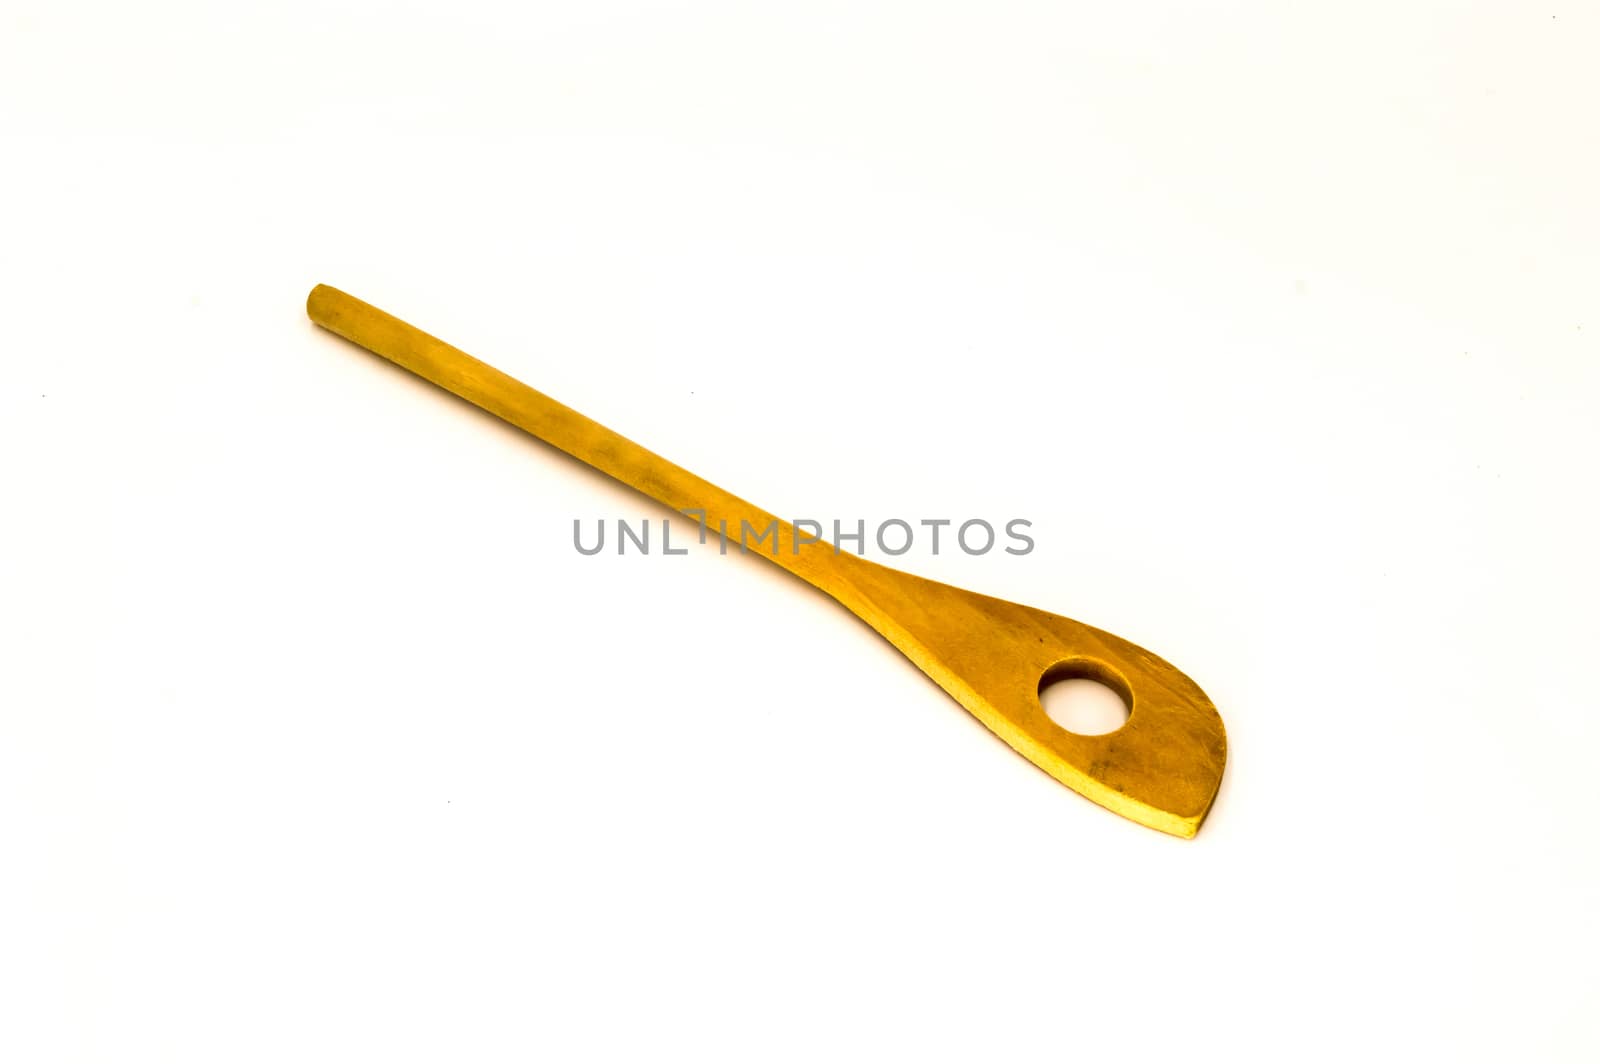 Wooden spoon with a hole on a white background